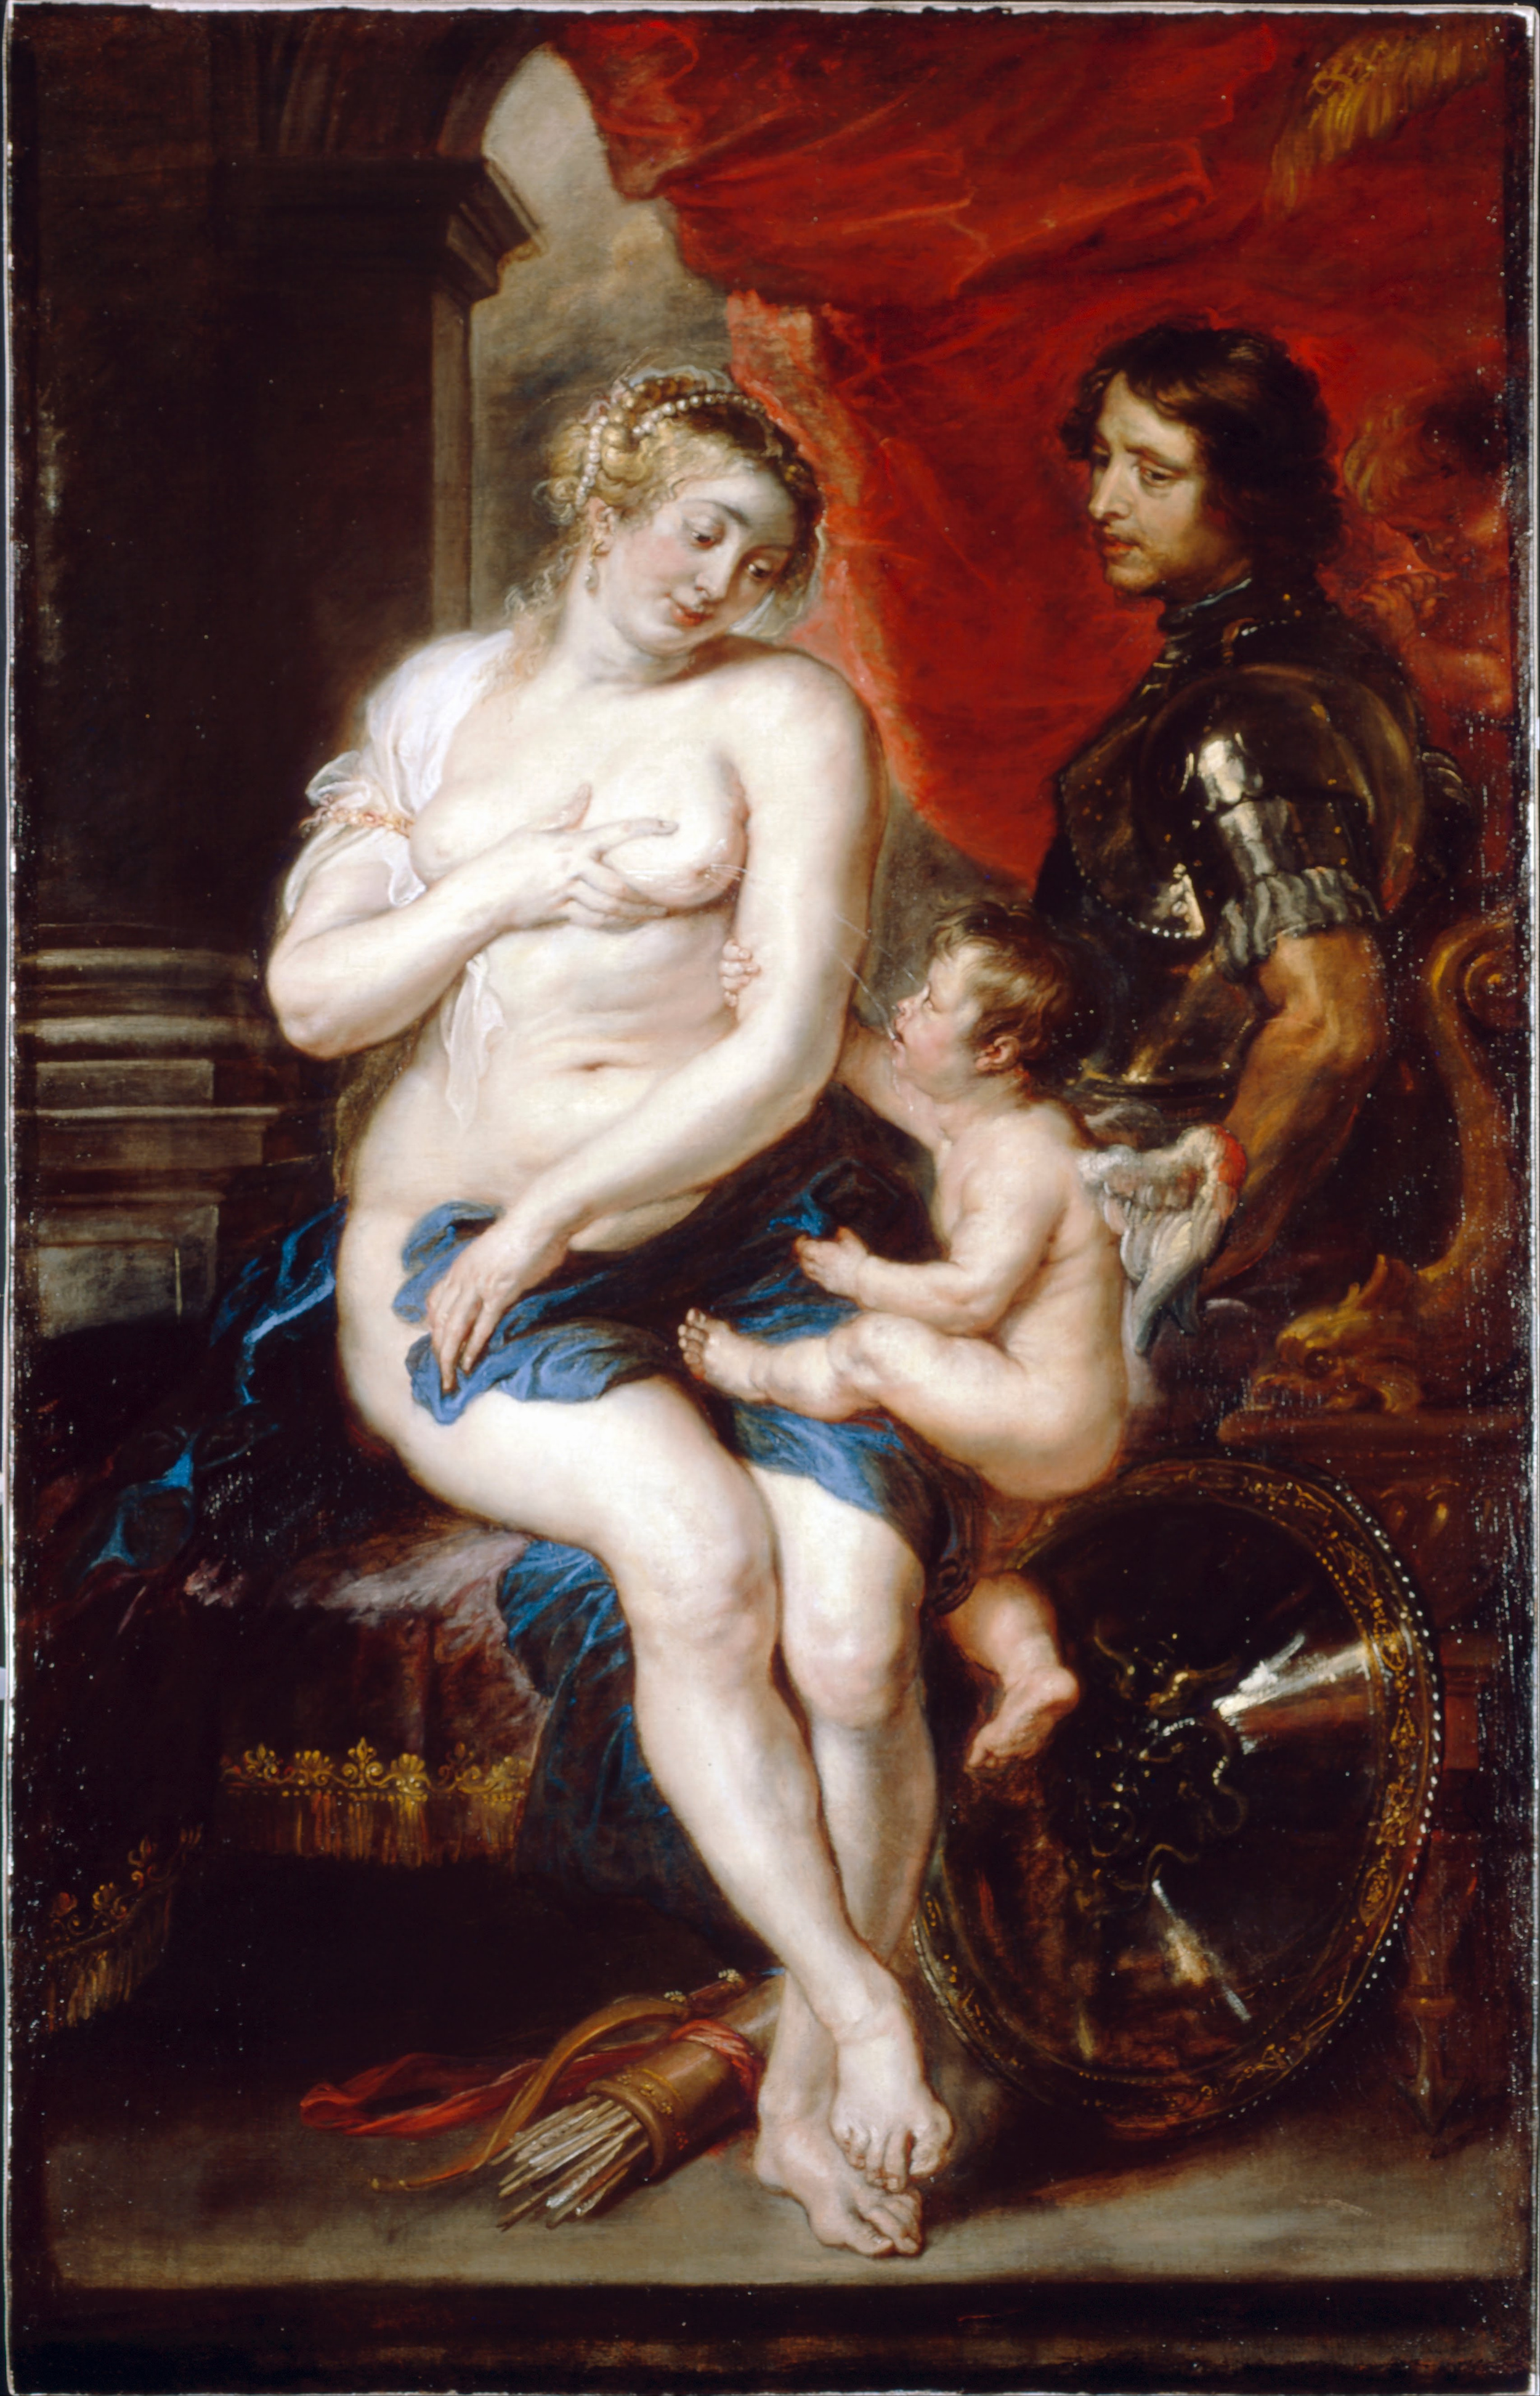 Venus, Mars and Cupid by Peter Paul Rubens - Early to mid-1630s - 133 x 195,2 cm Dulwich Picture Gallery